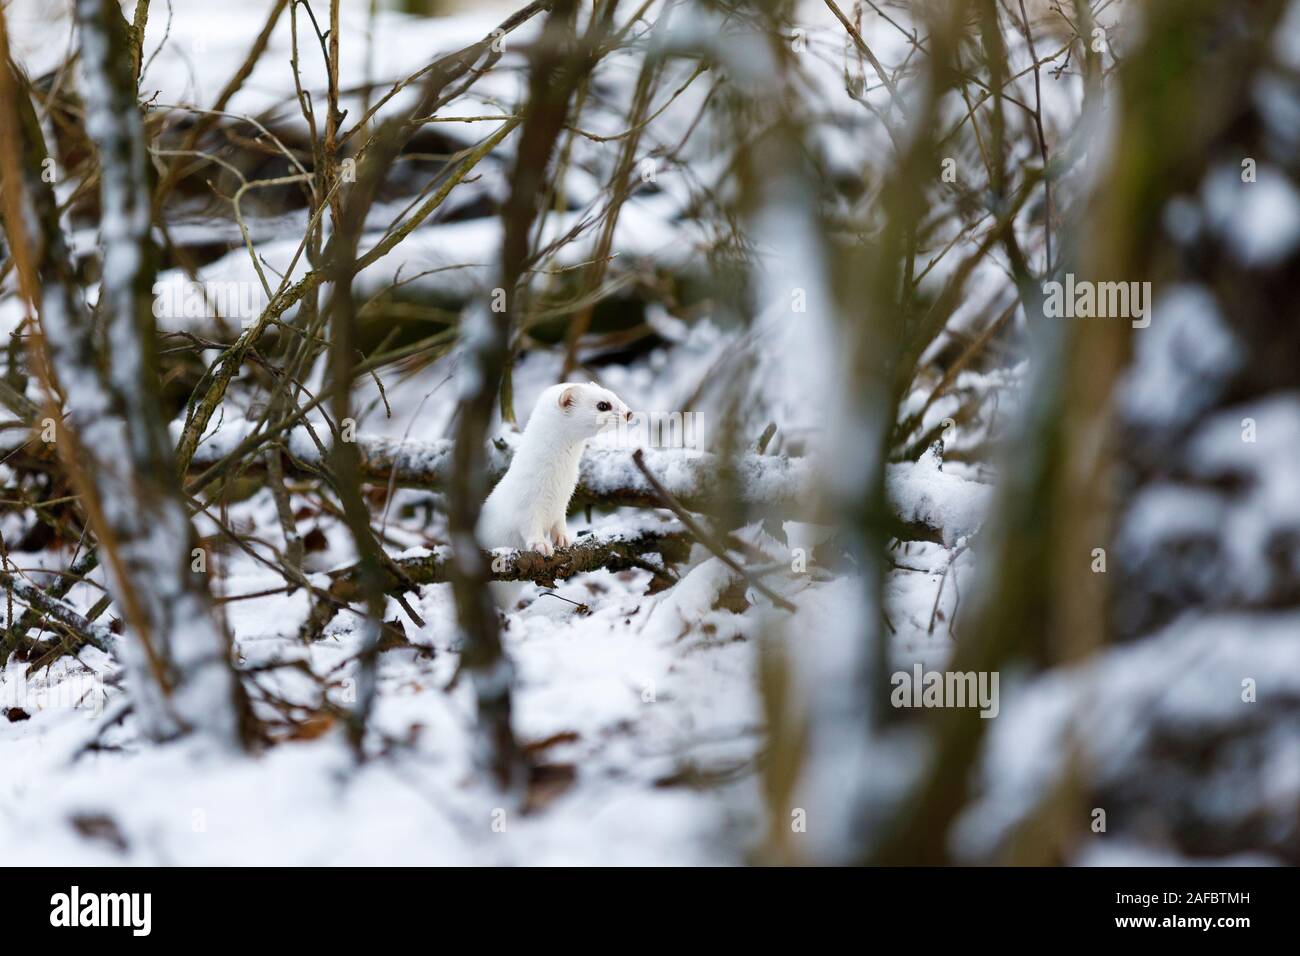 Small white least weasel between tree branches in snowy winter forest Stock Photo